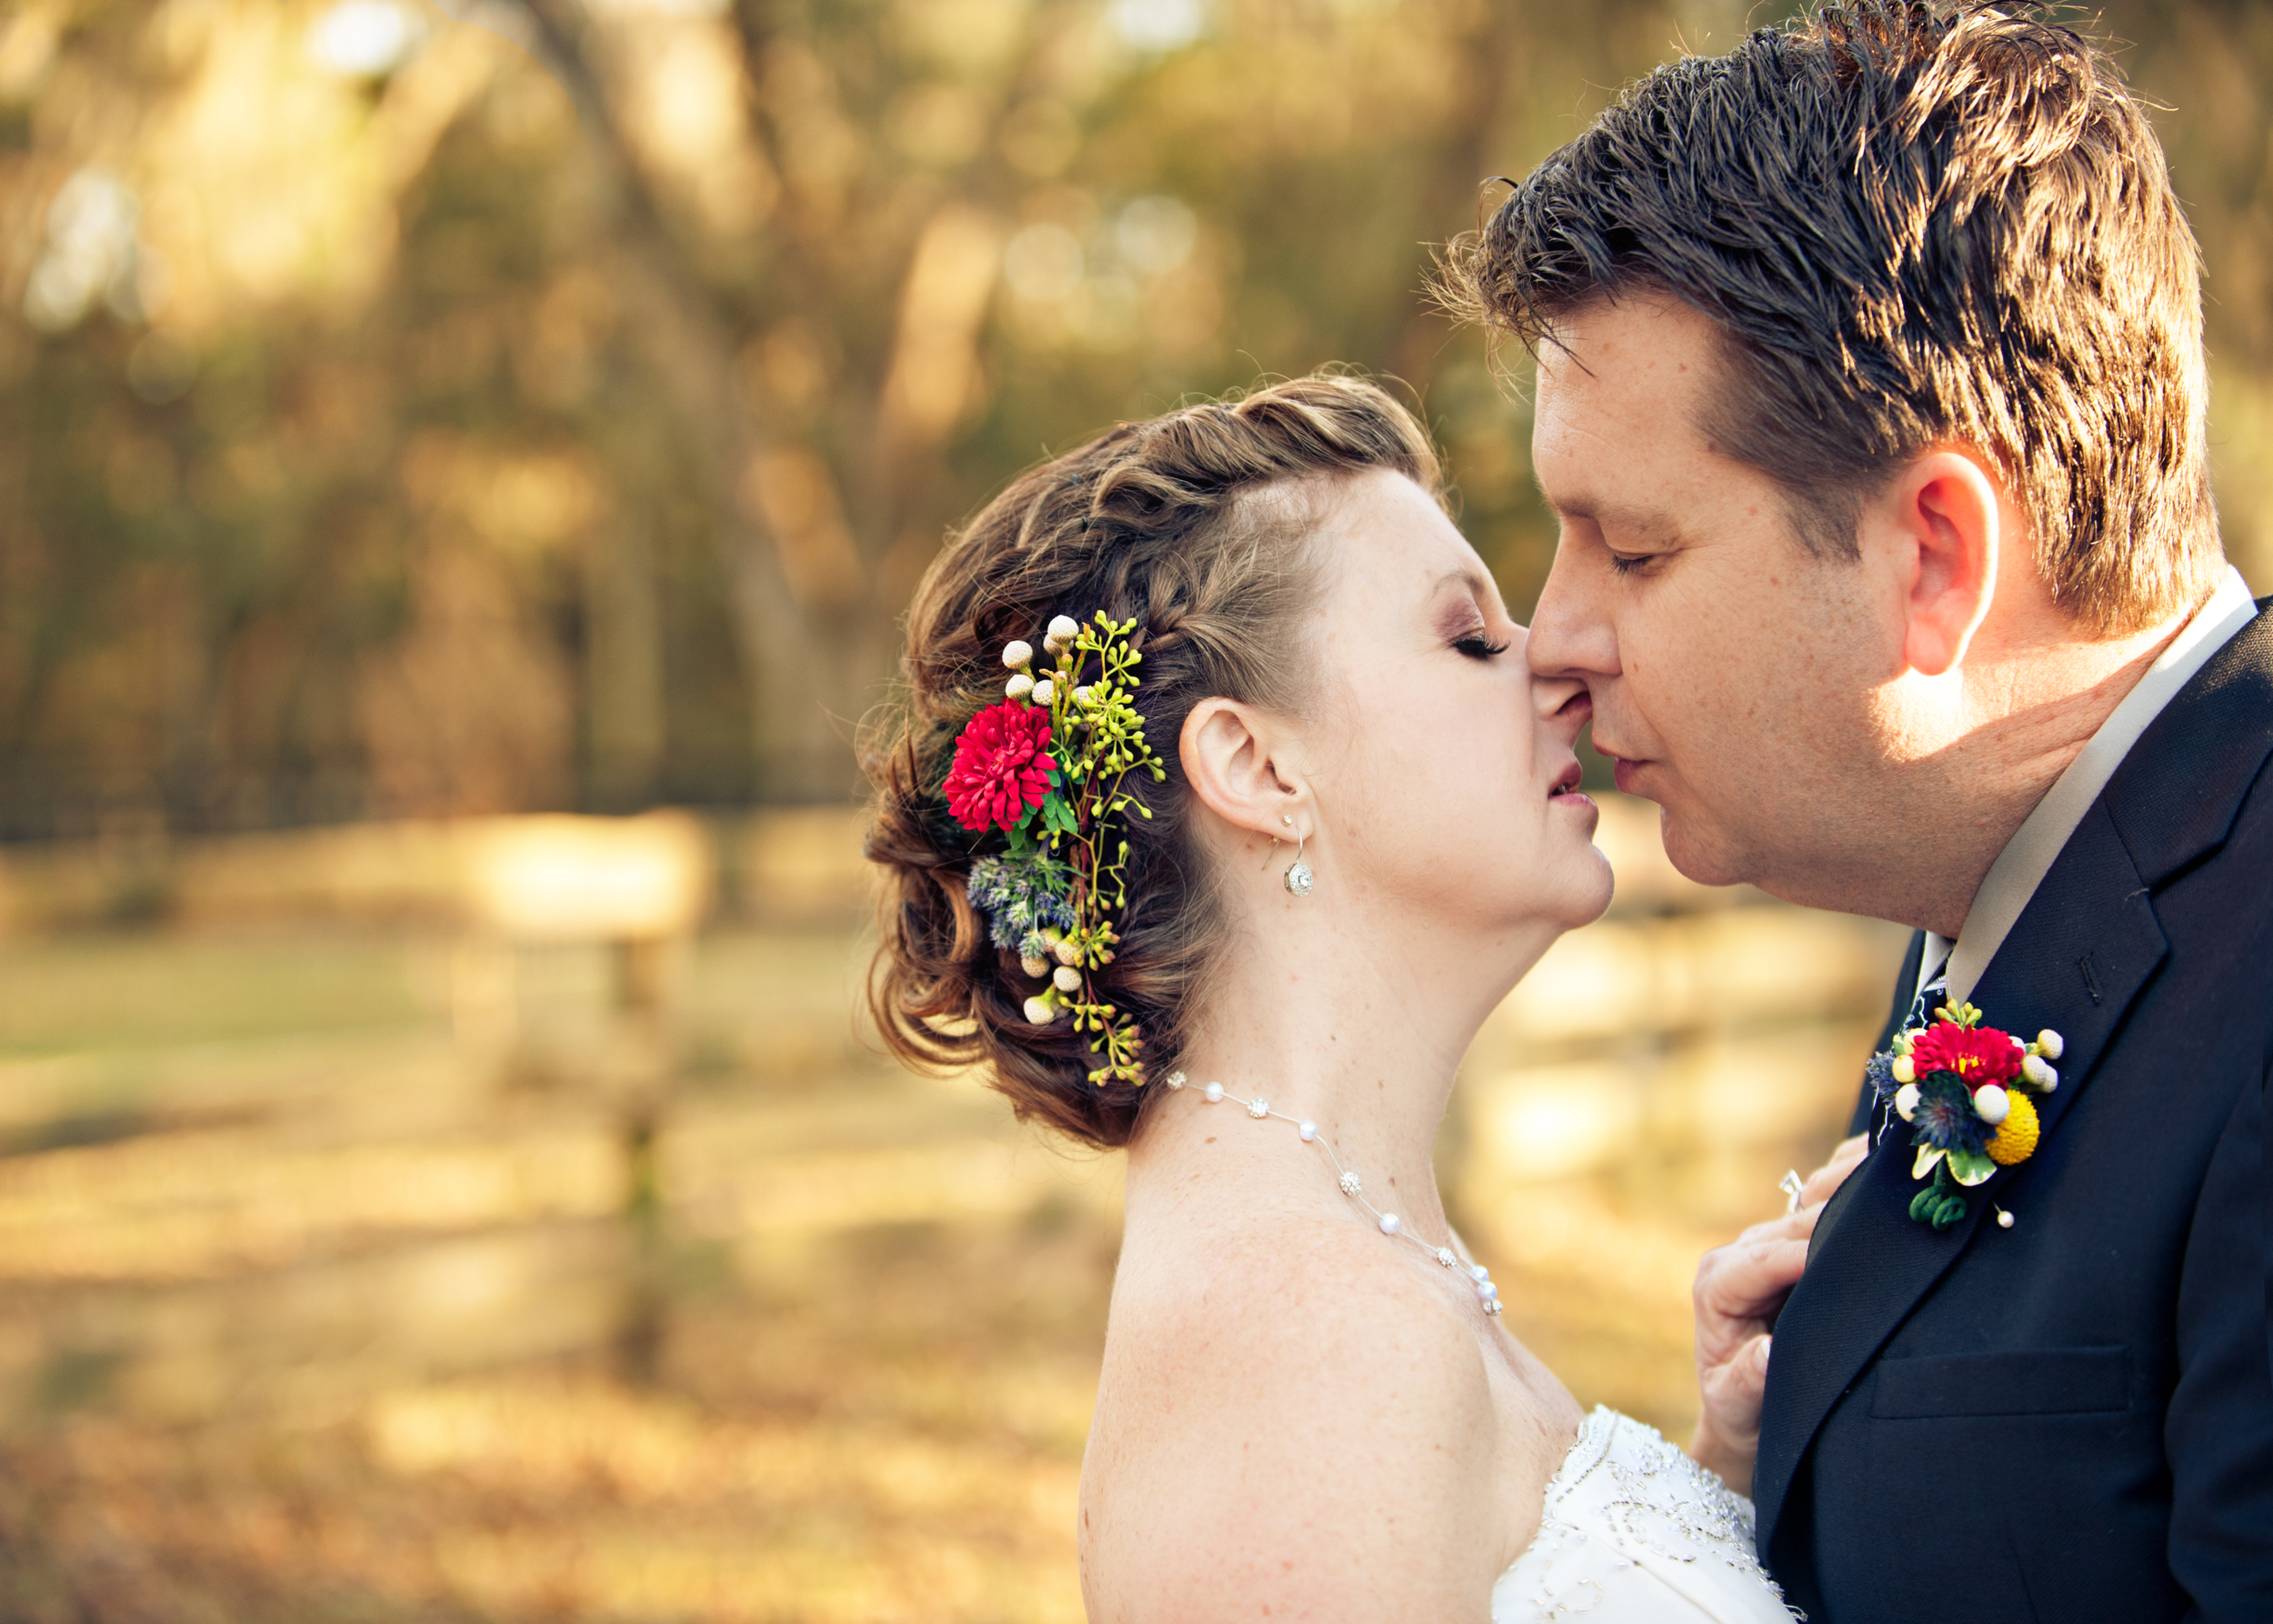 Bride and Groom kiss during their ceremony at their rural ceremony in Florida.jpg